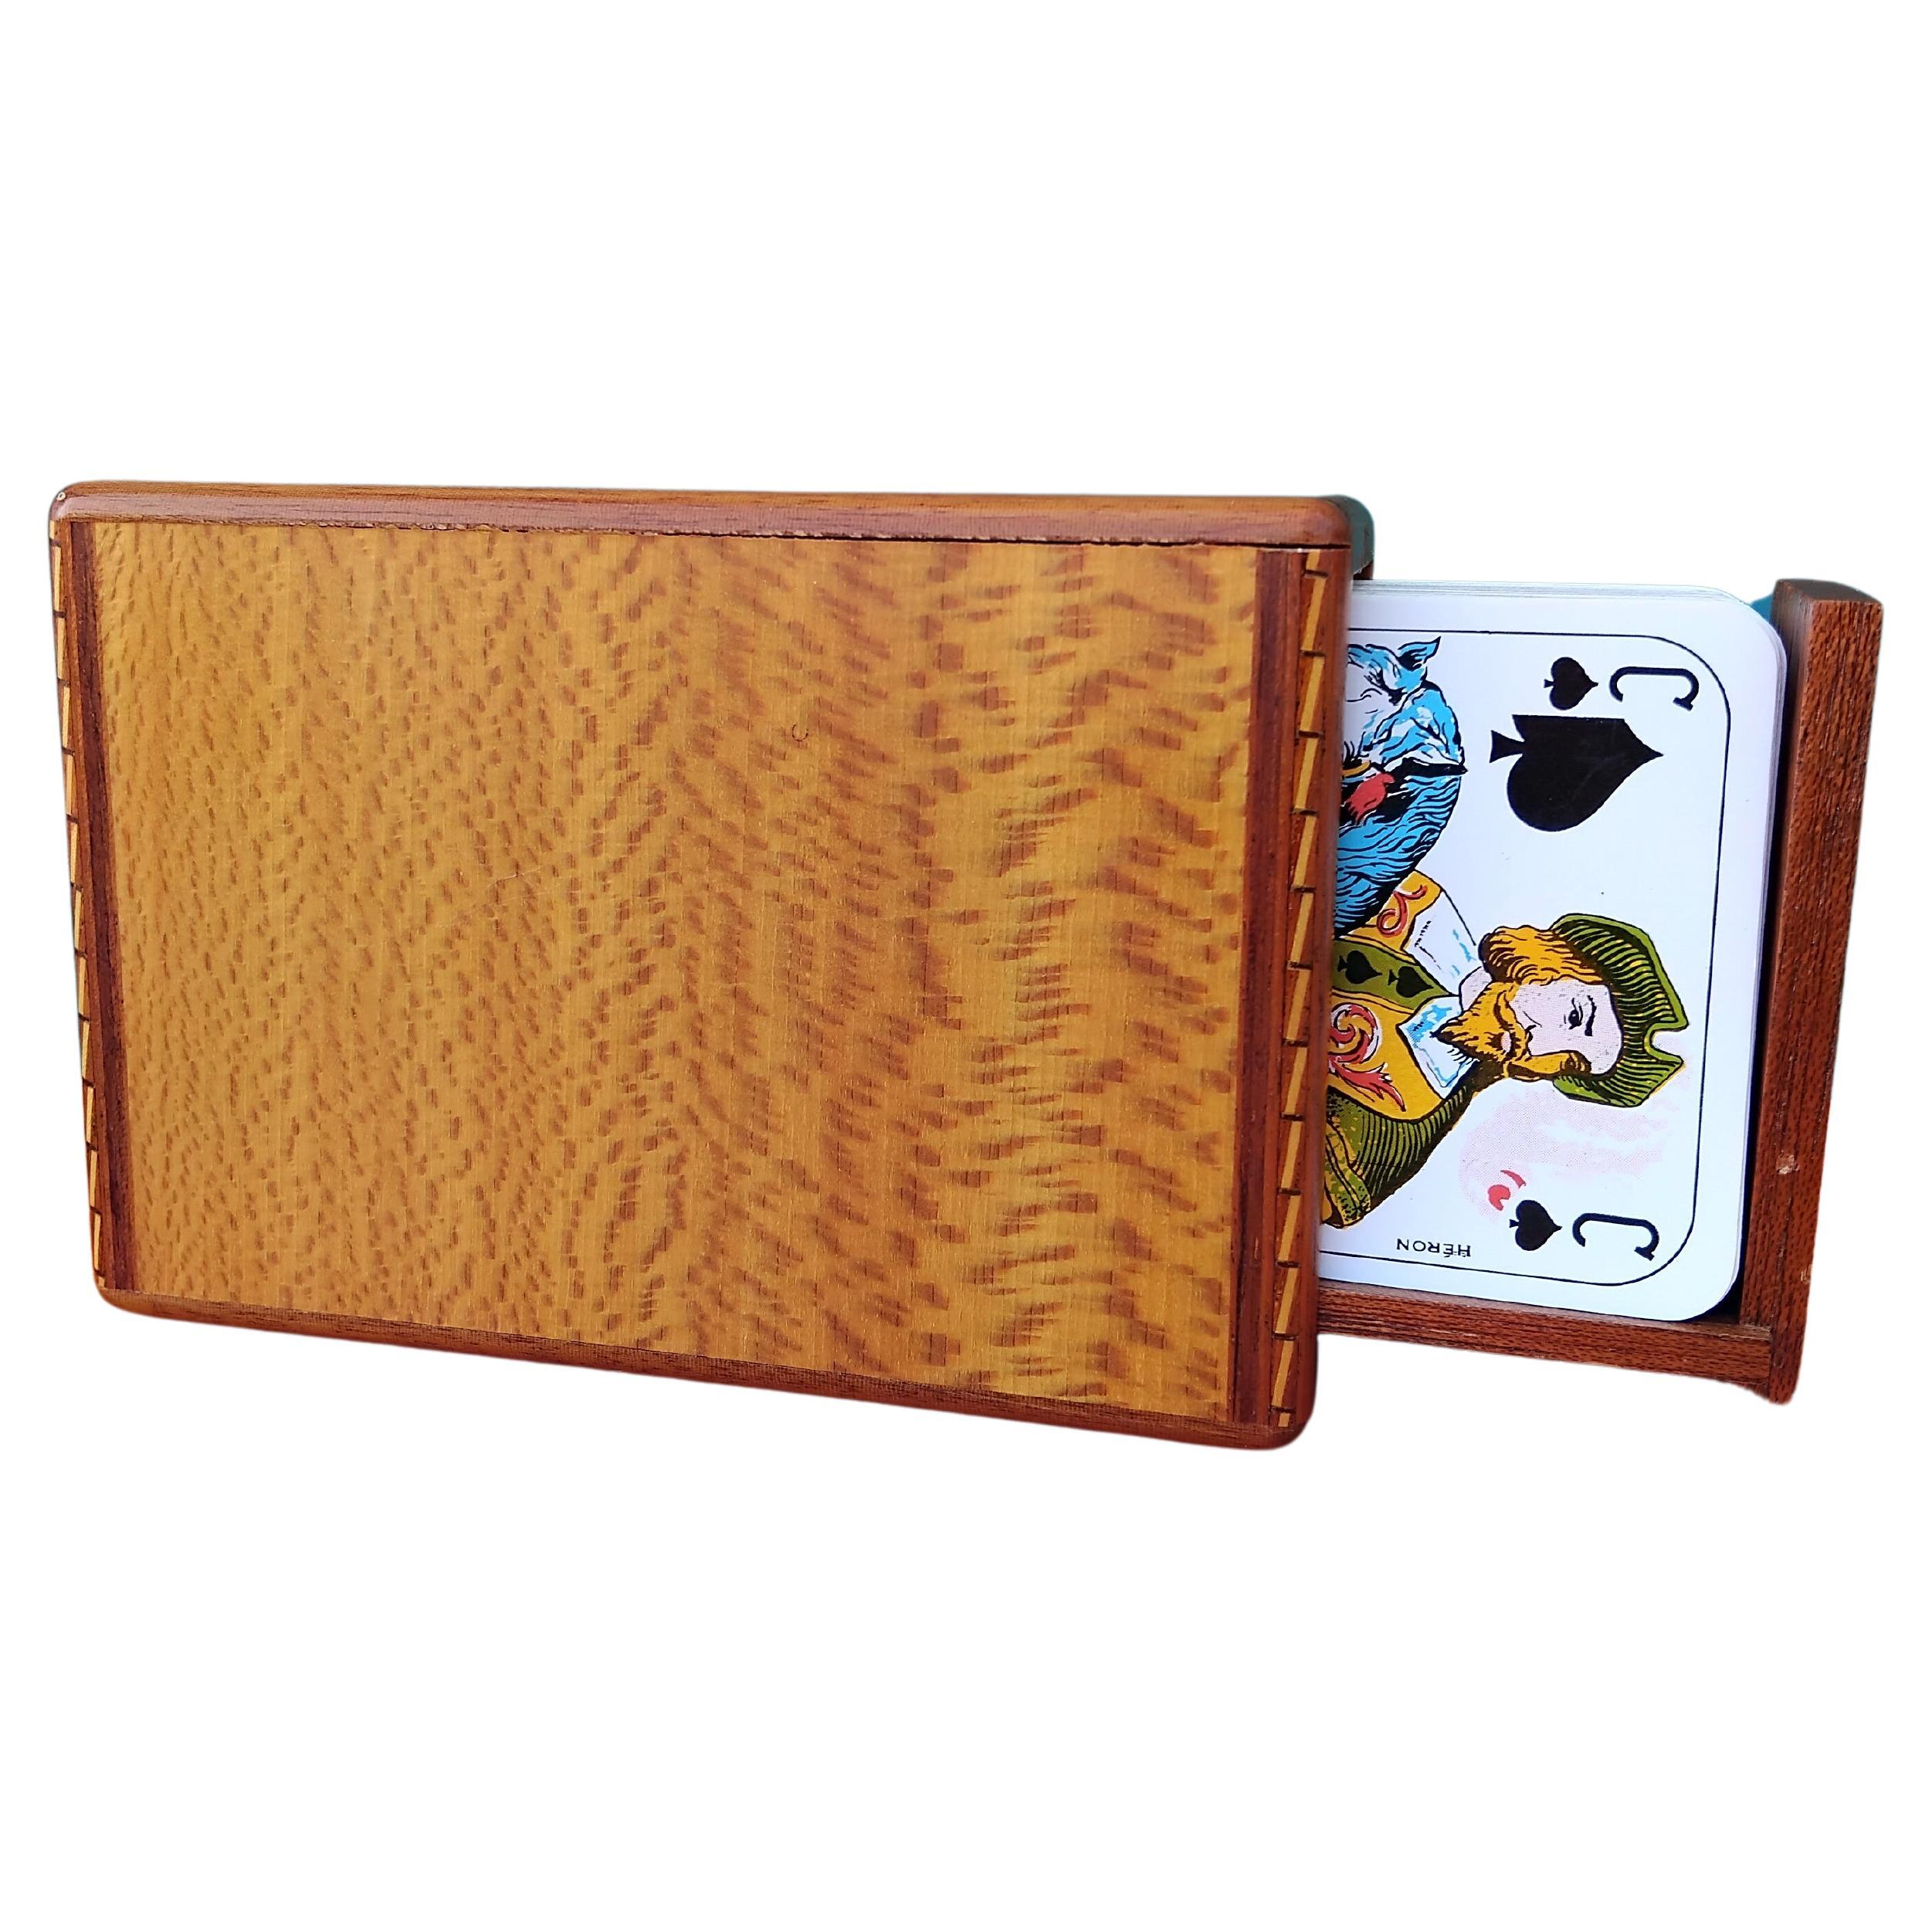 Hermès Playing Cards Box Card Game Case in Lacquered Elm Burl Wood For Sale